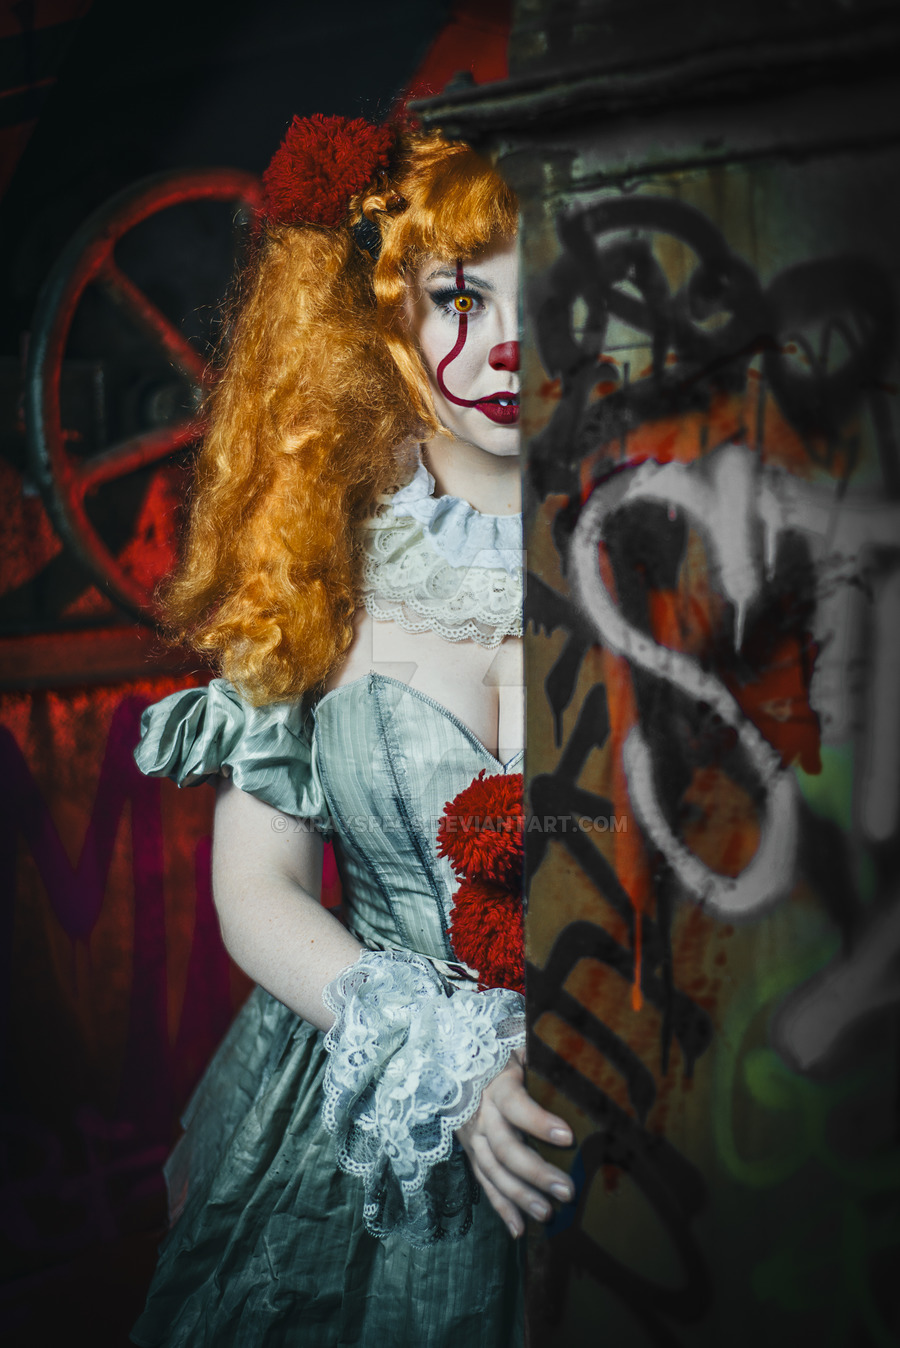 te_elle_cosplay_as_pennywise_from_it_by_xrayspecs-dd5l5my